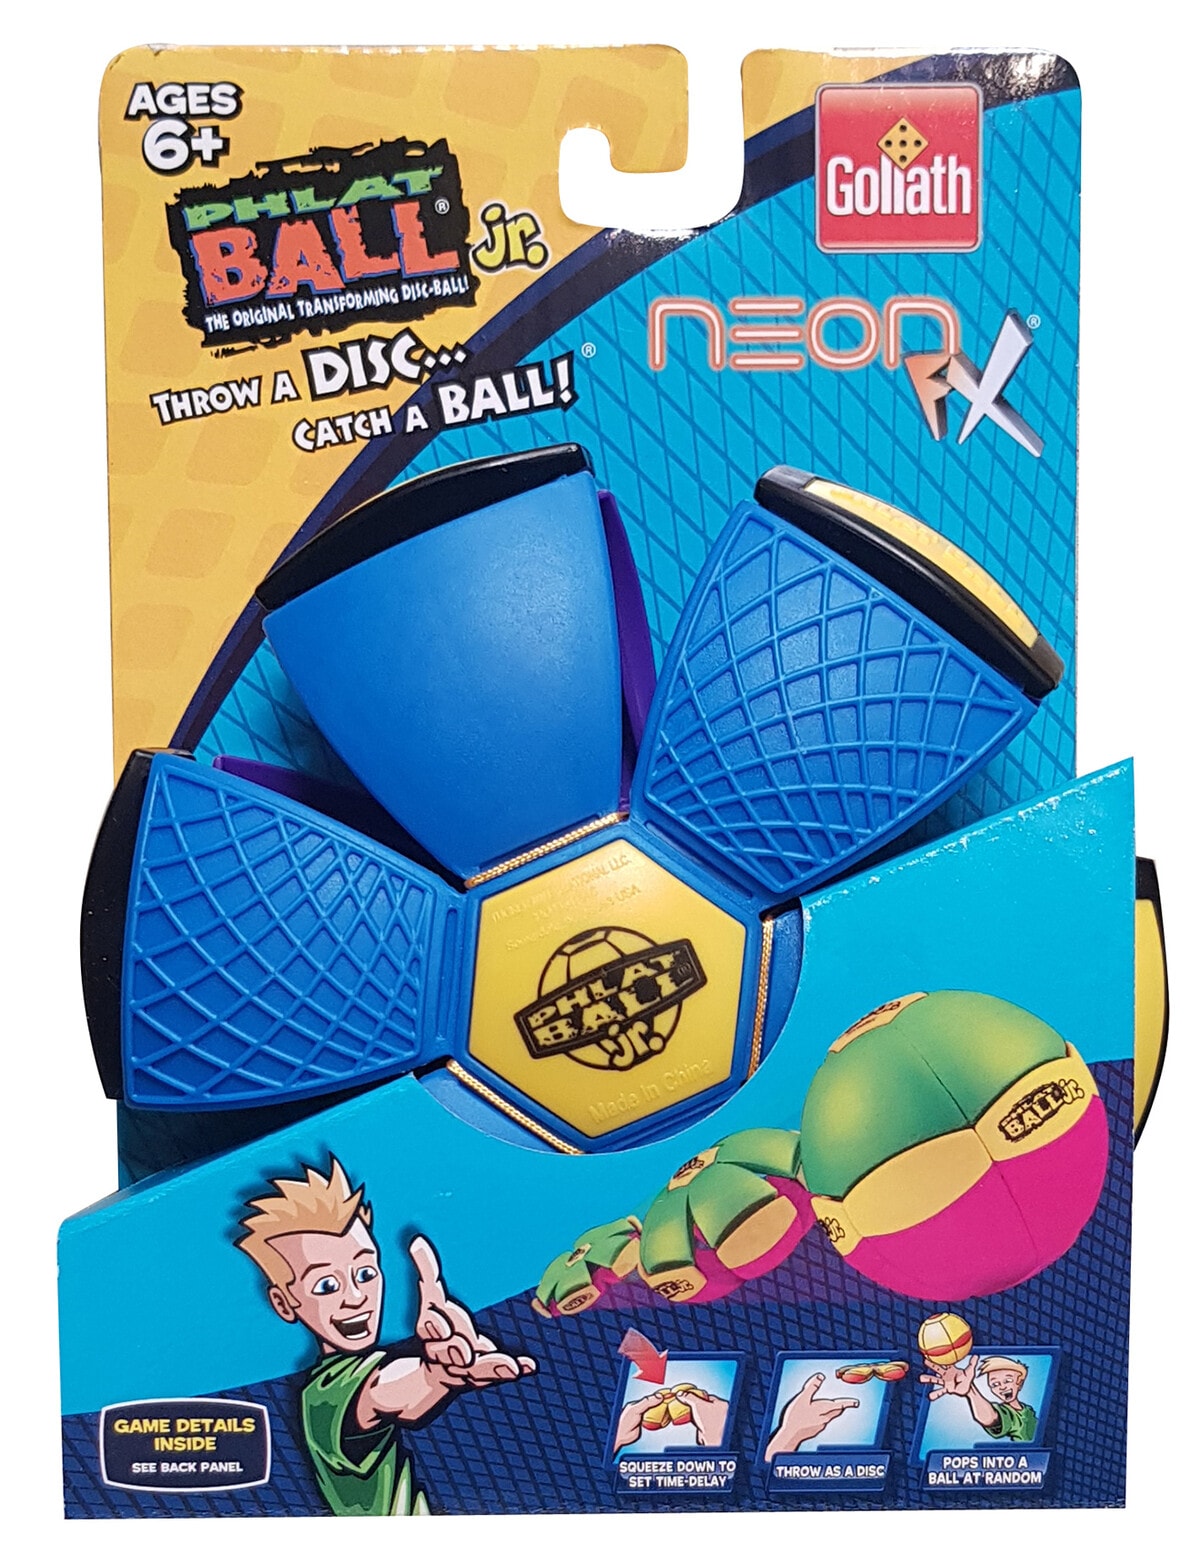 Goliath Phlat Ball V3 Green and Purple Frisbee Disk Suction Ball